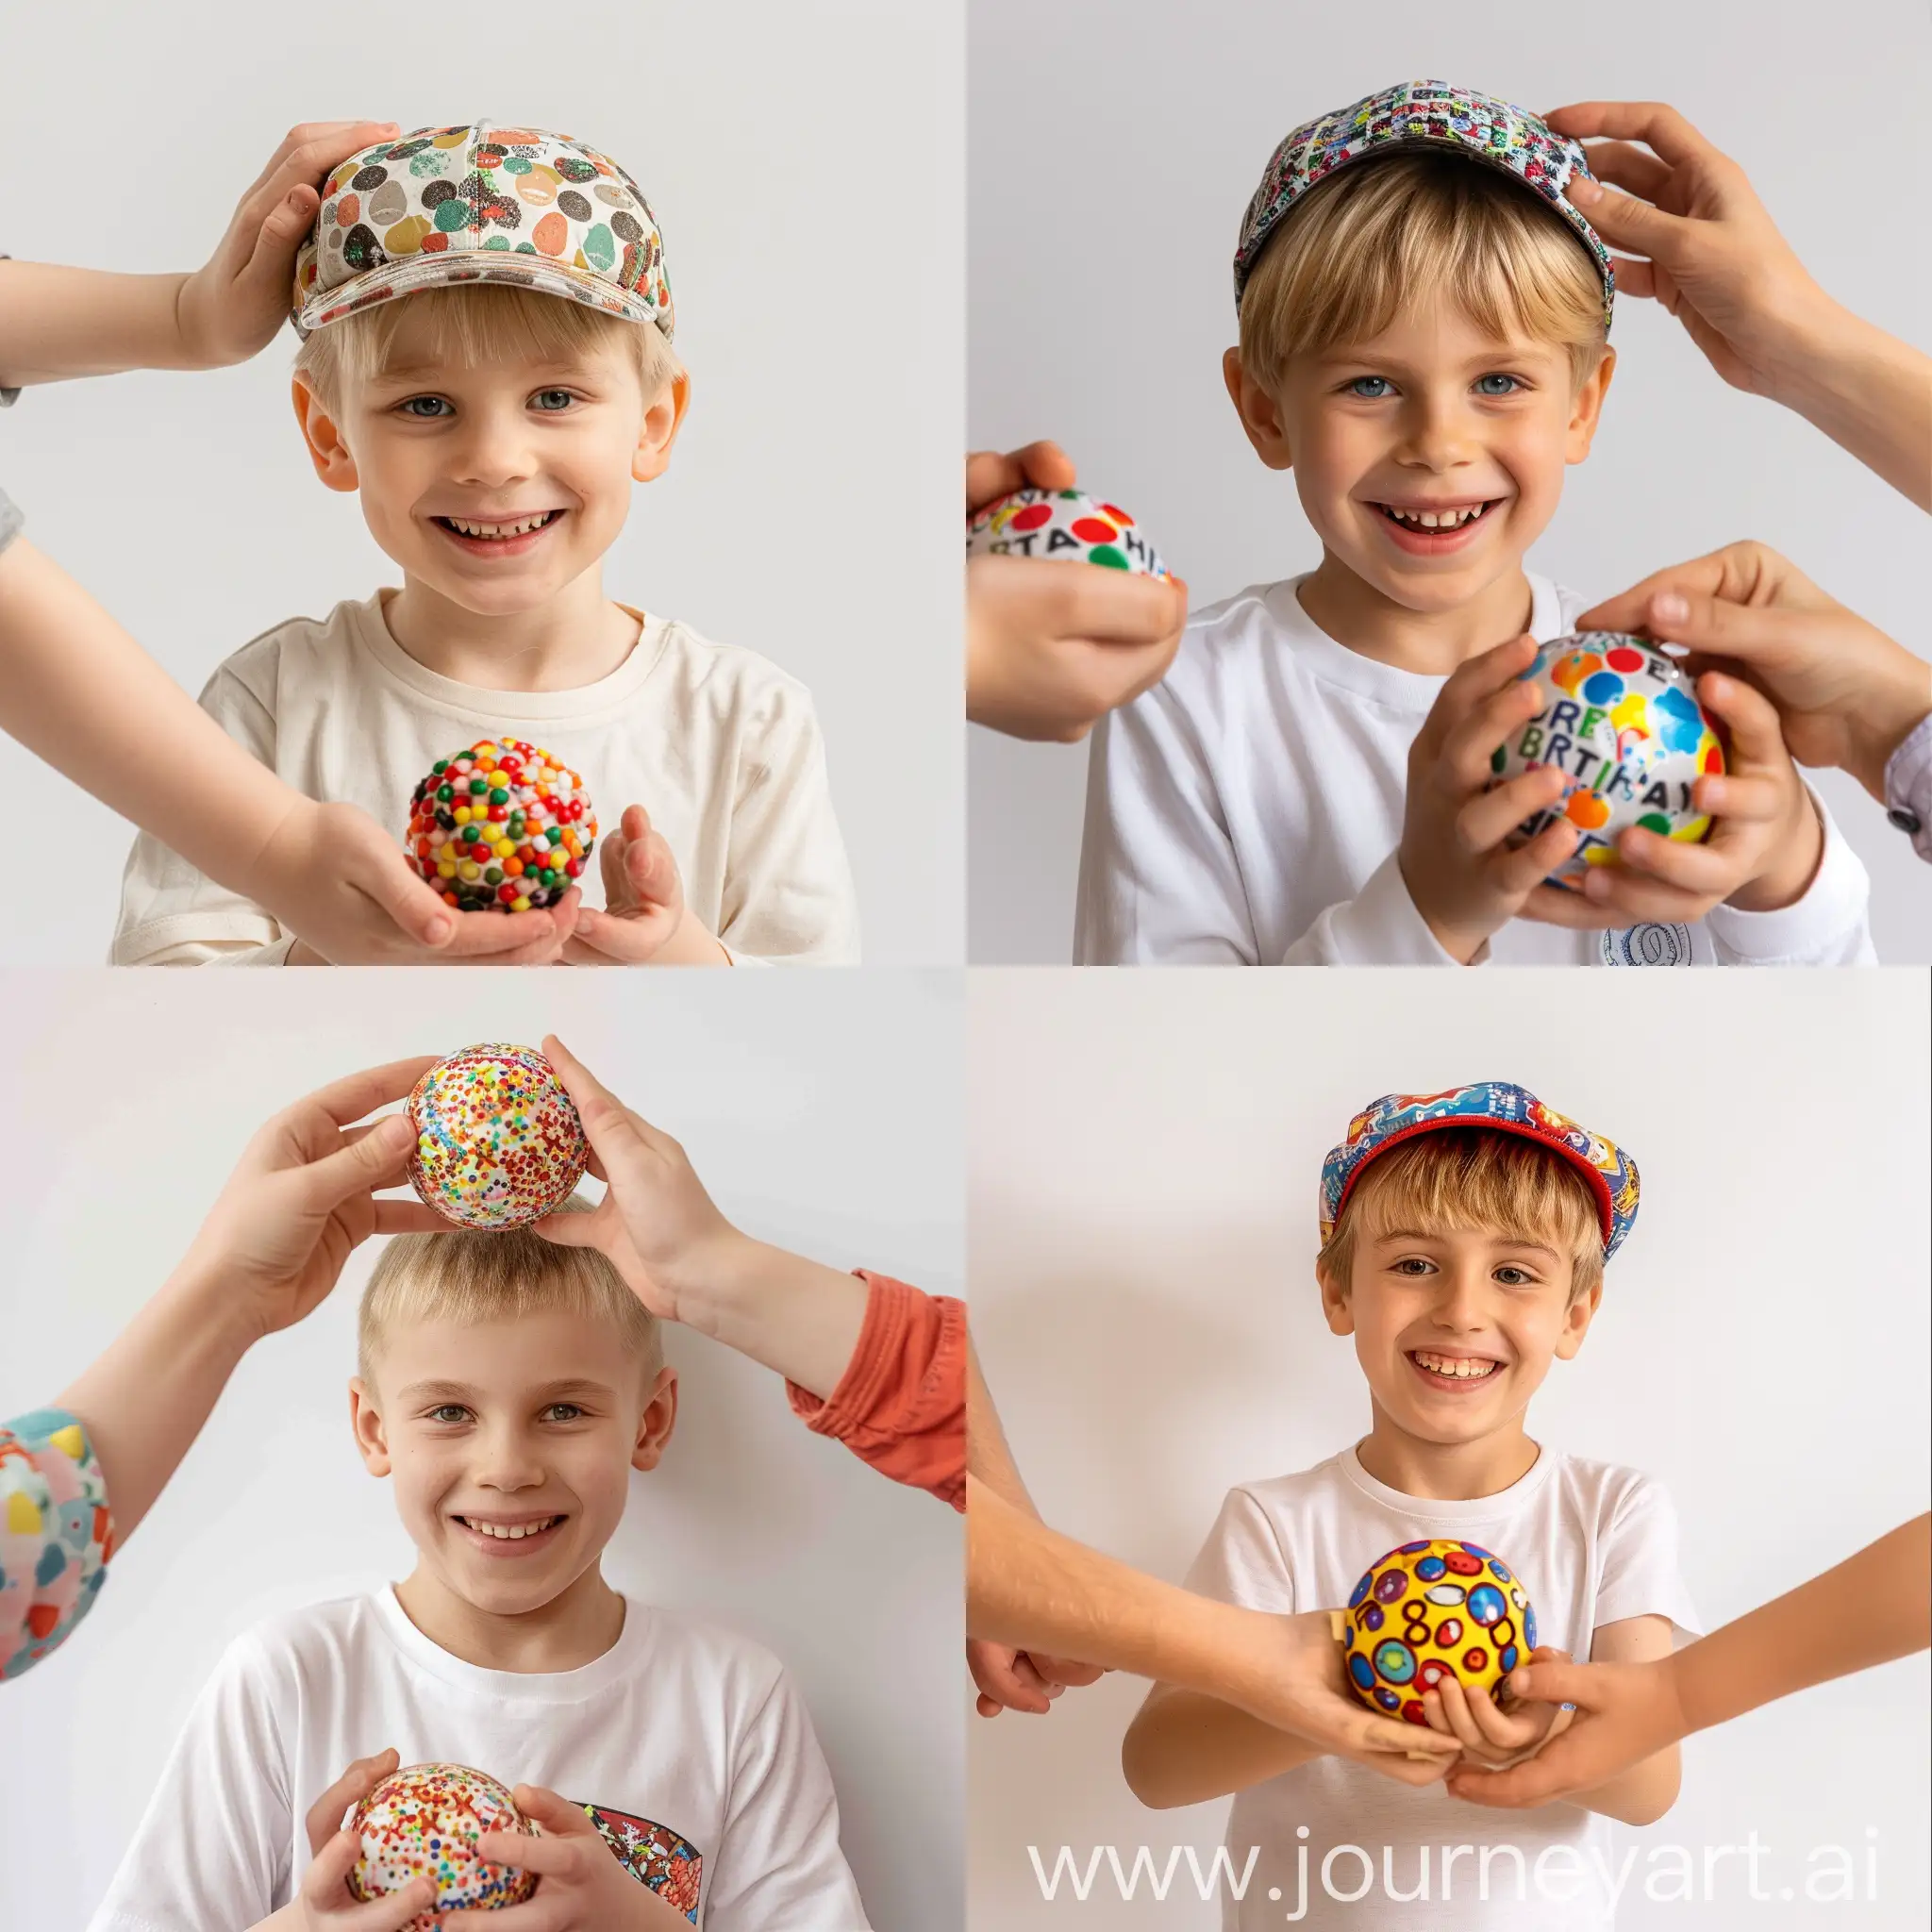 a detailed, extremely realistic photoshot taken from a distance of 3 meters of a European blond-haired boy 8 y.o. with a short haircut celebrating his birthday. He is smiling,  a festive ball in his hands. The entire image is displayed on a white background, with the hands and cap fully visible